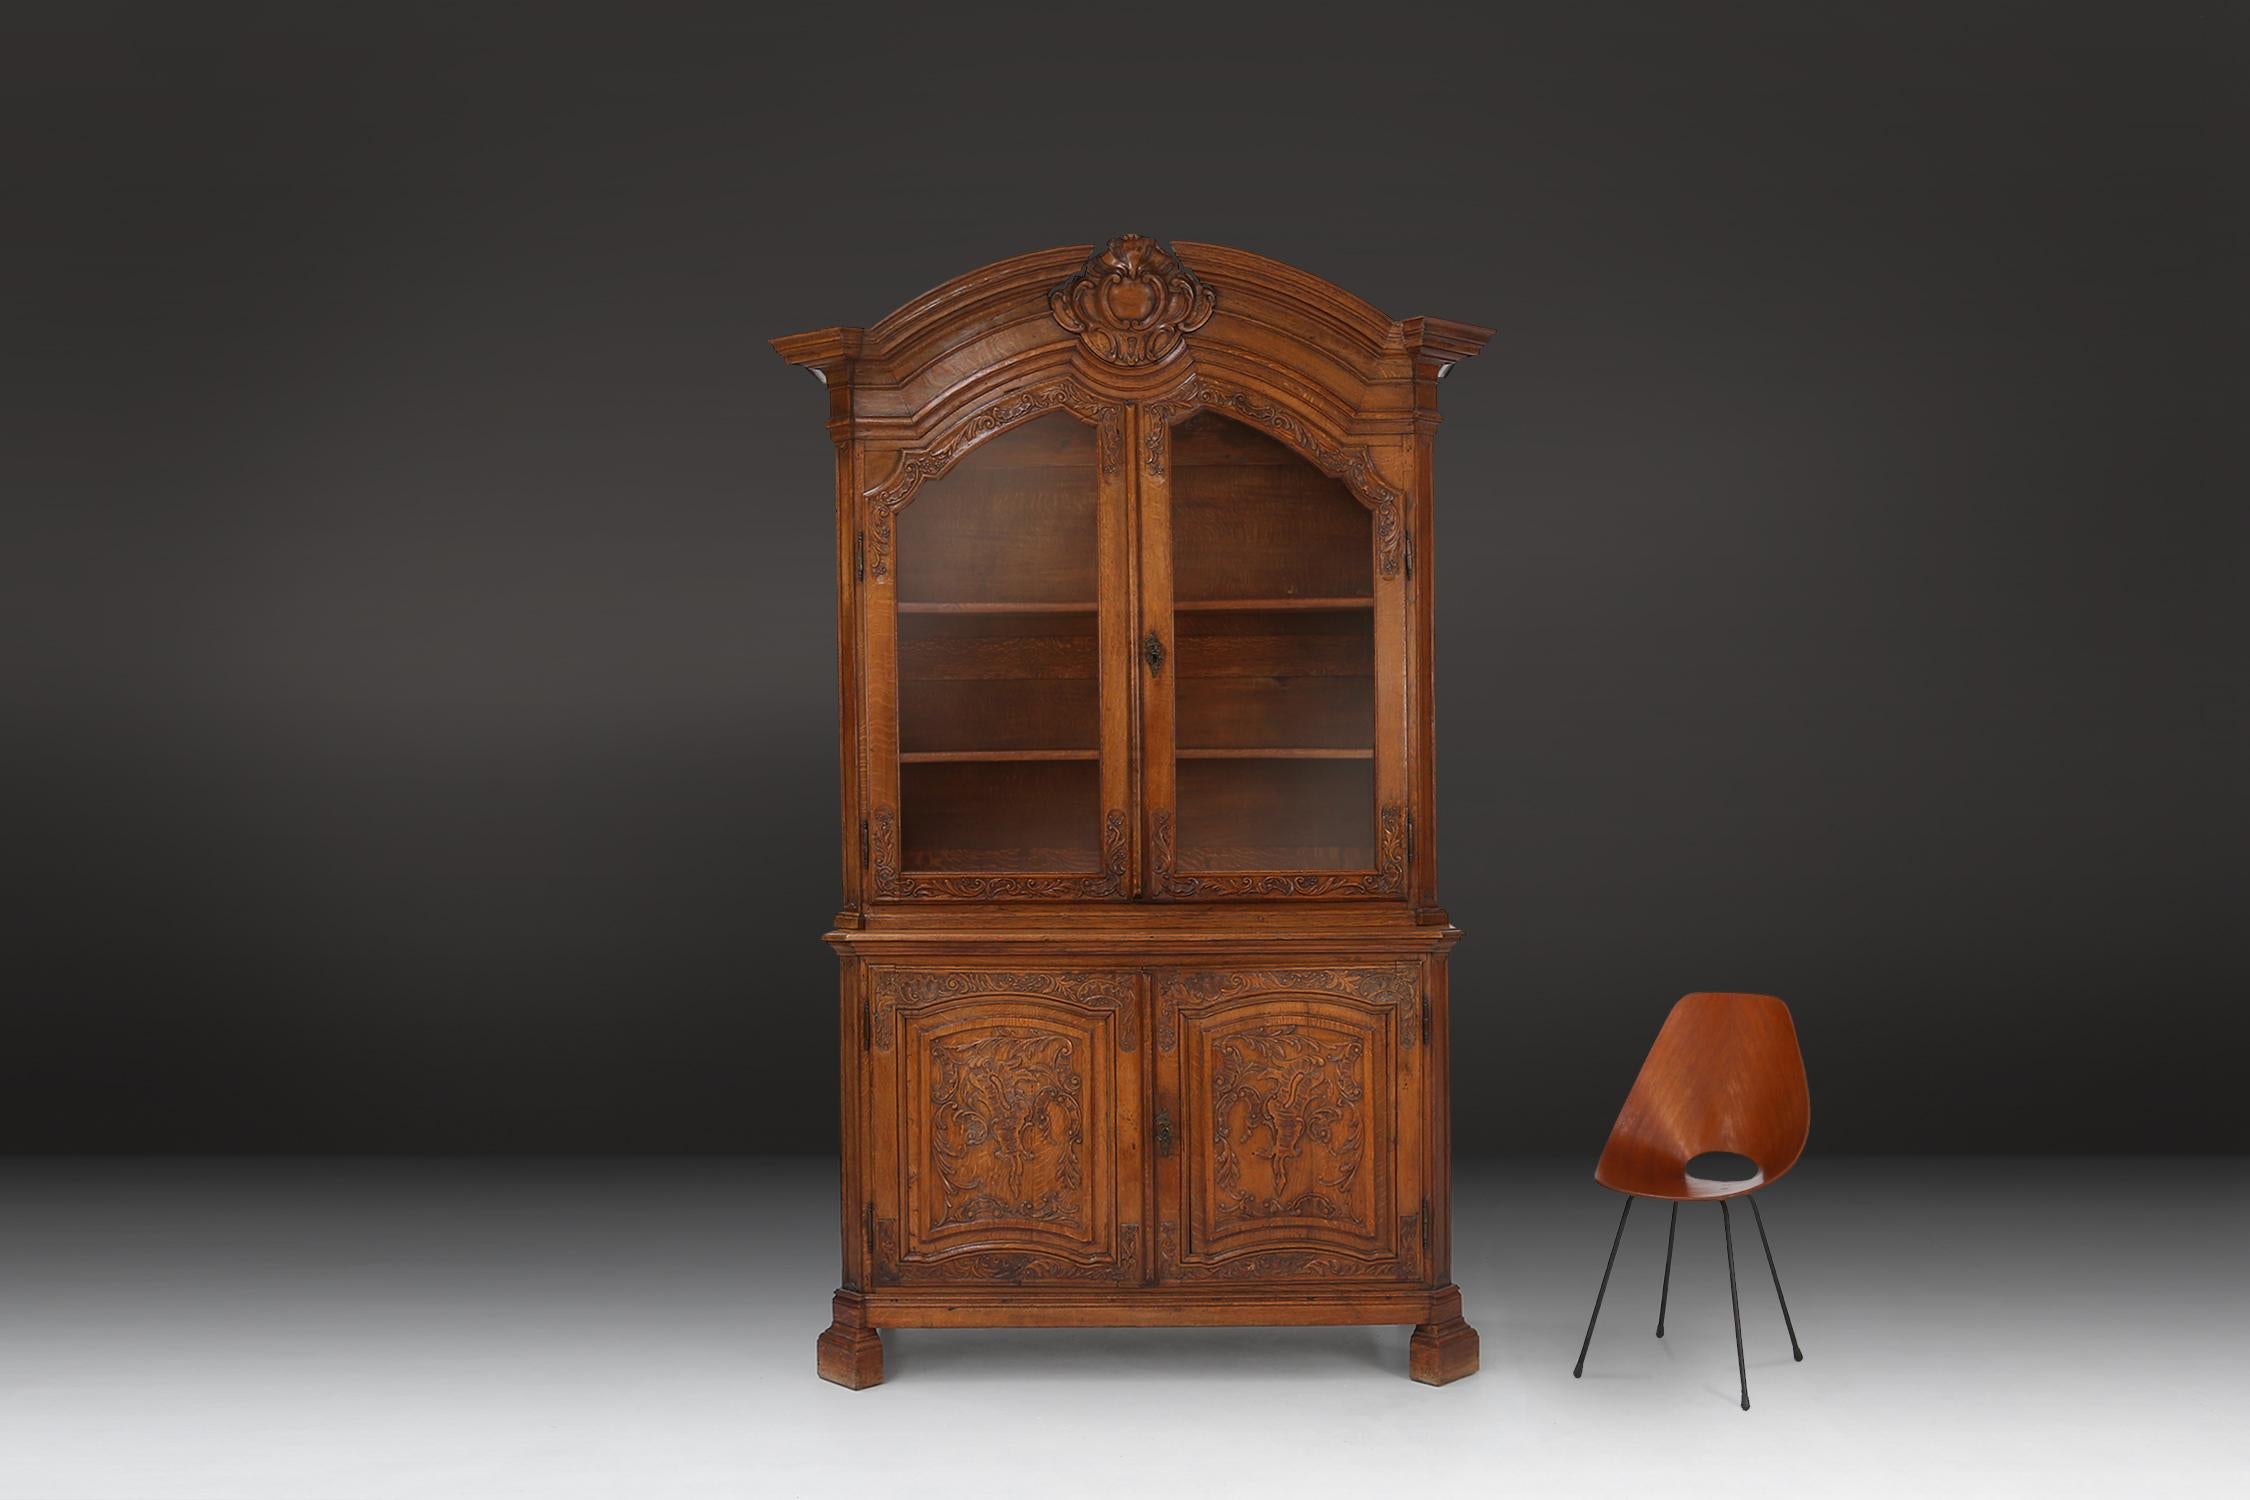 This beautiful antique Liège cabinet is a real eye-catcher in any interior. With its fine carvings and glass doors, this cabinet is the perfect way to display your valuables. The cabinet is made of high quality wood and has a rich history dating